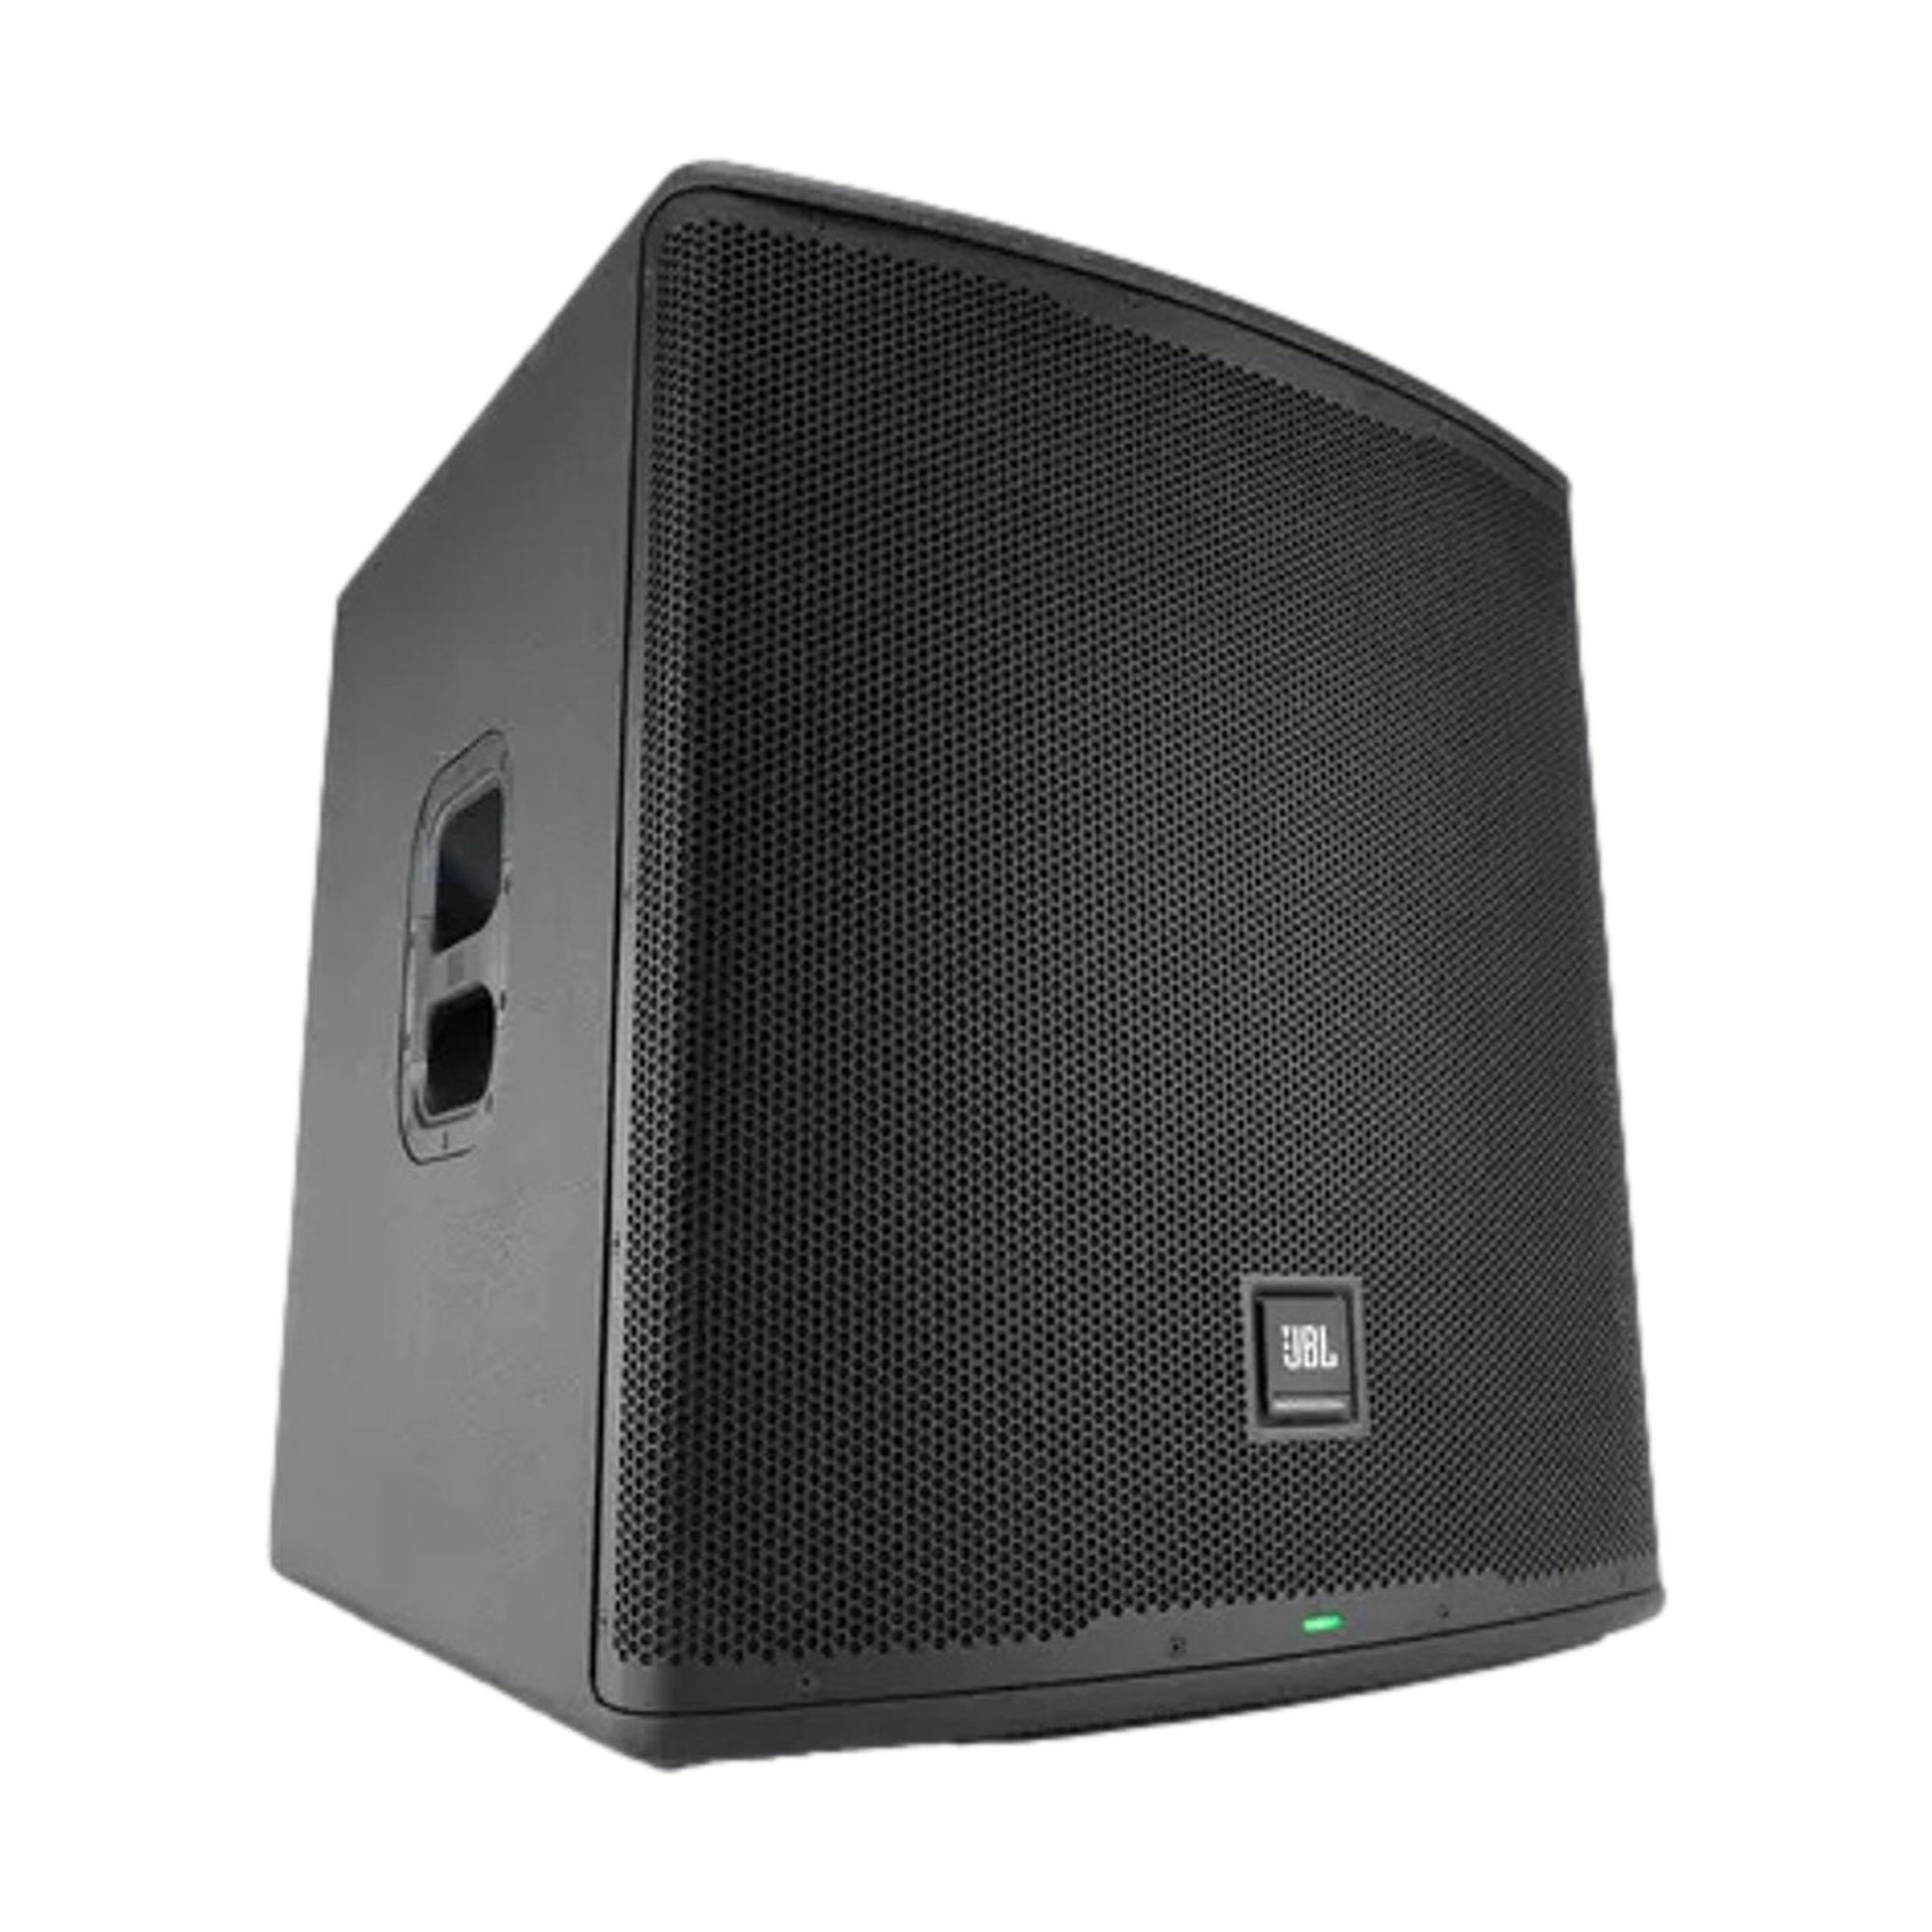 The JBL EON718 18-inch subwoofer is part of JBL’s new EON700 Series of powered PAs, which represent a major step forward in innovation and technology